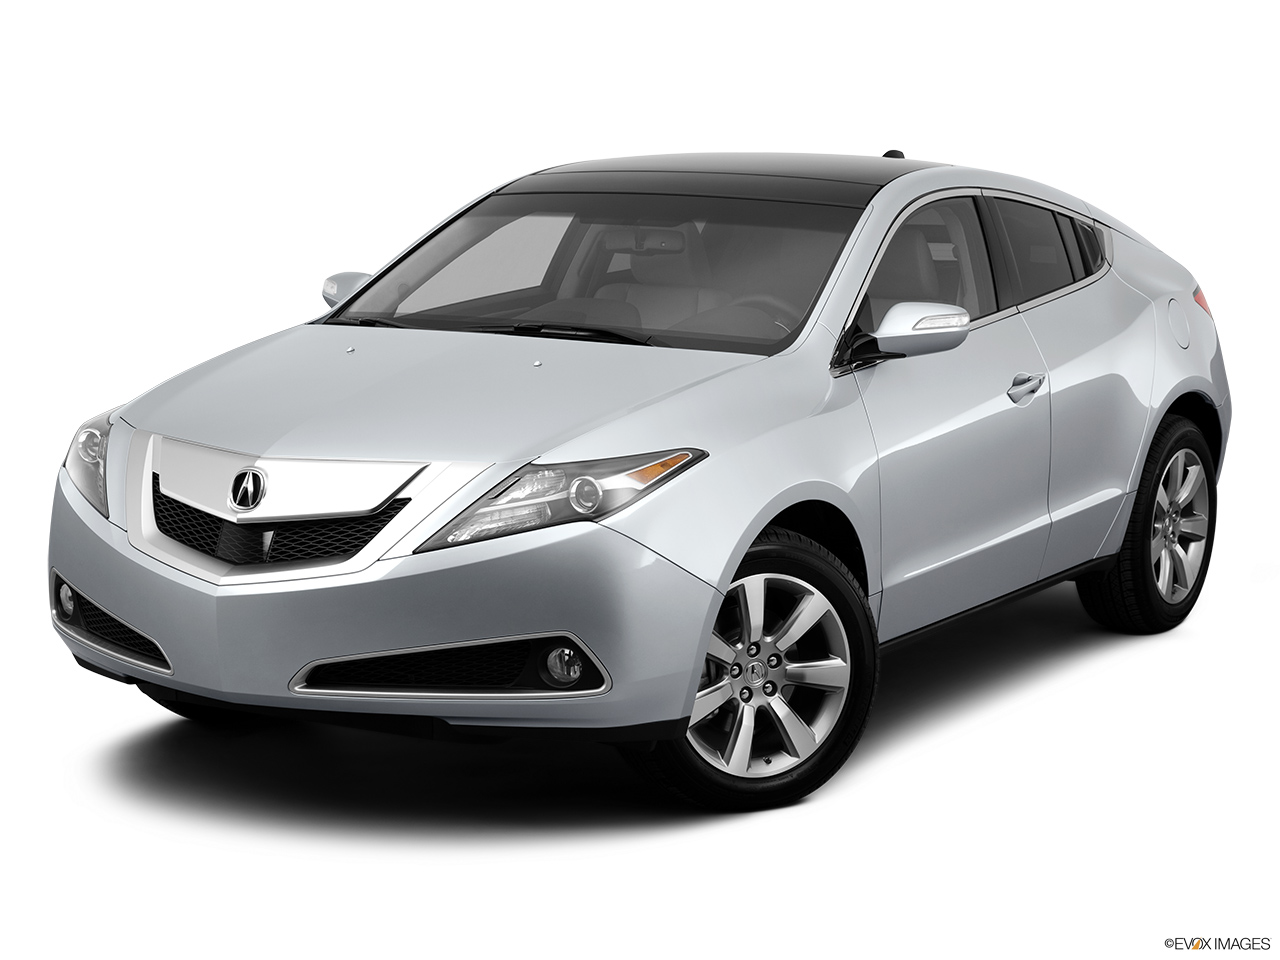 2011 Acura ZDX ZDX Advance Front angle view. 